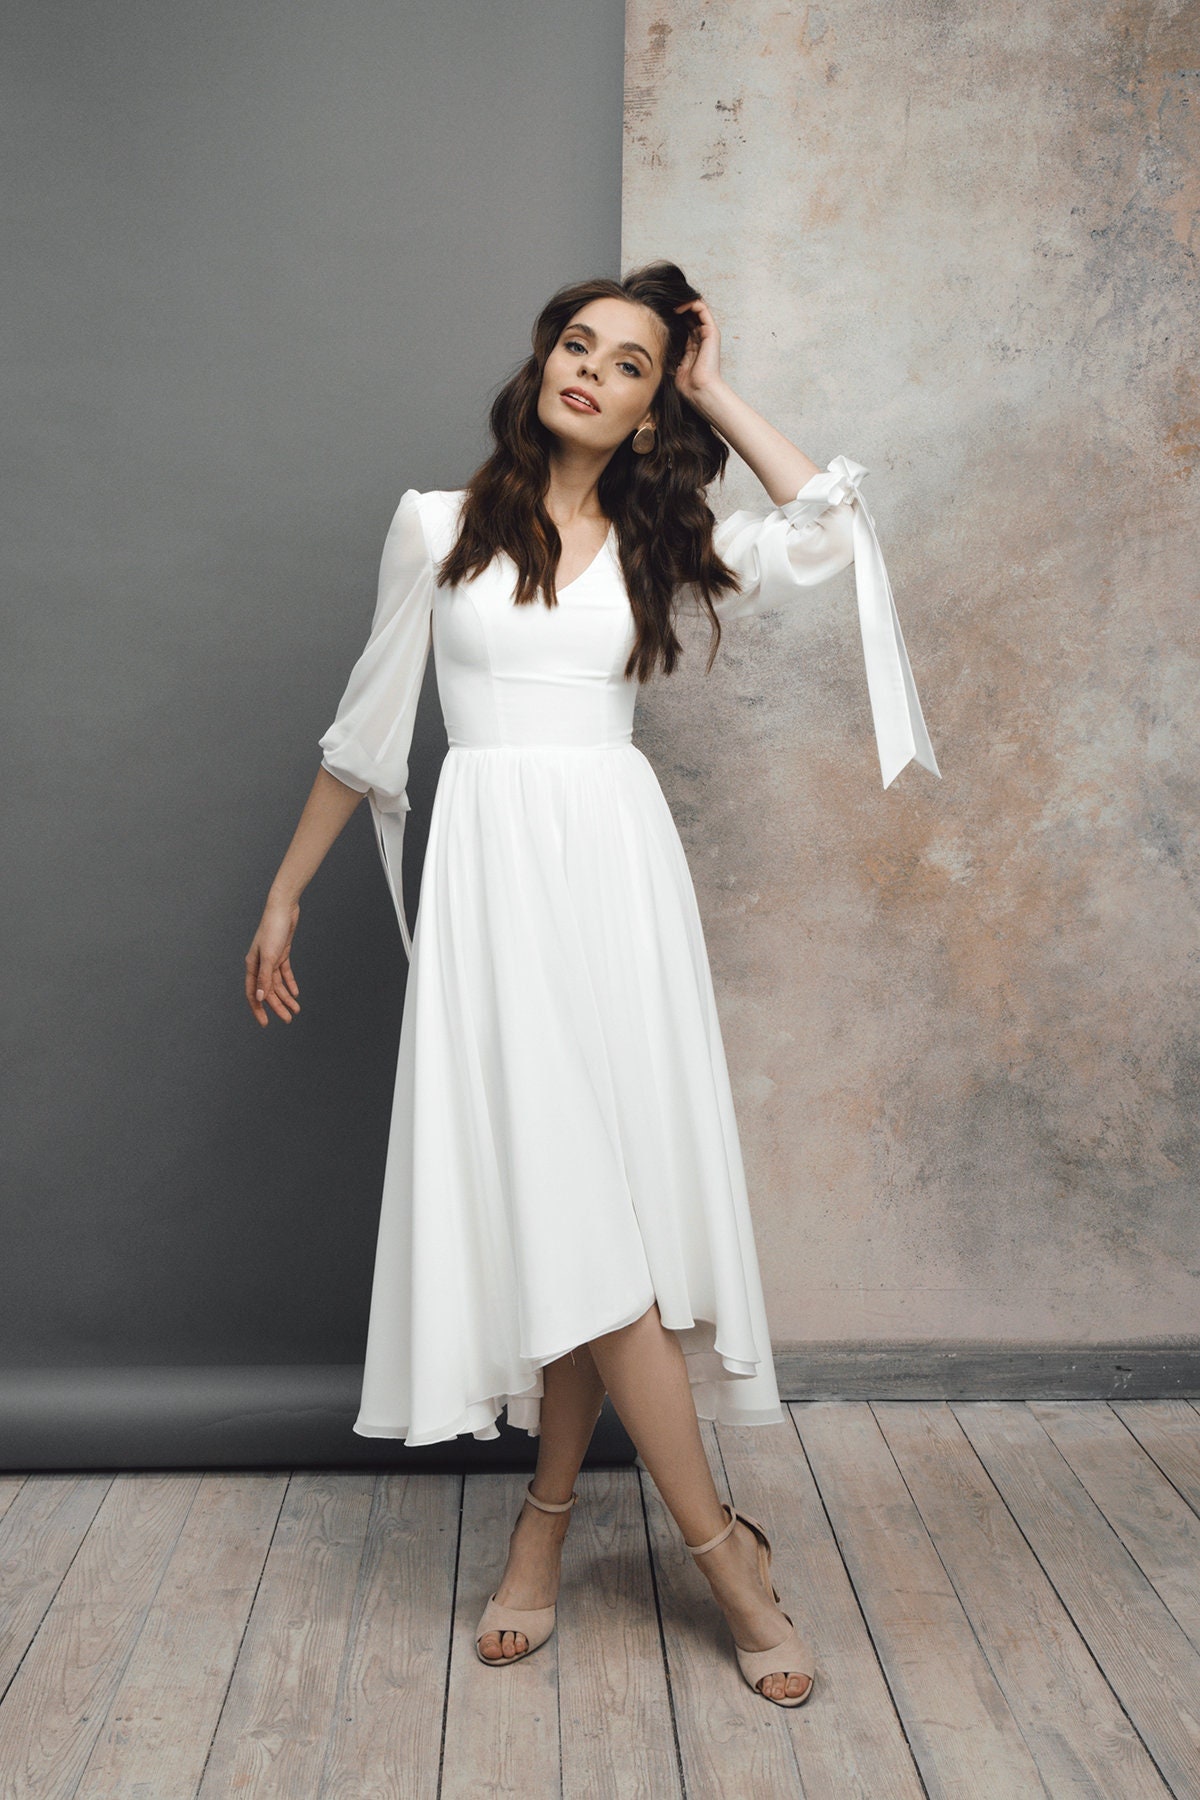 These High-Low Wedding Dresses Offer the Best of Both Worlds